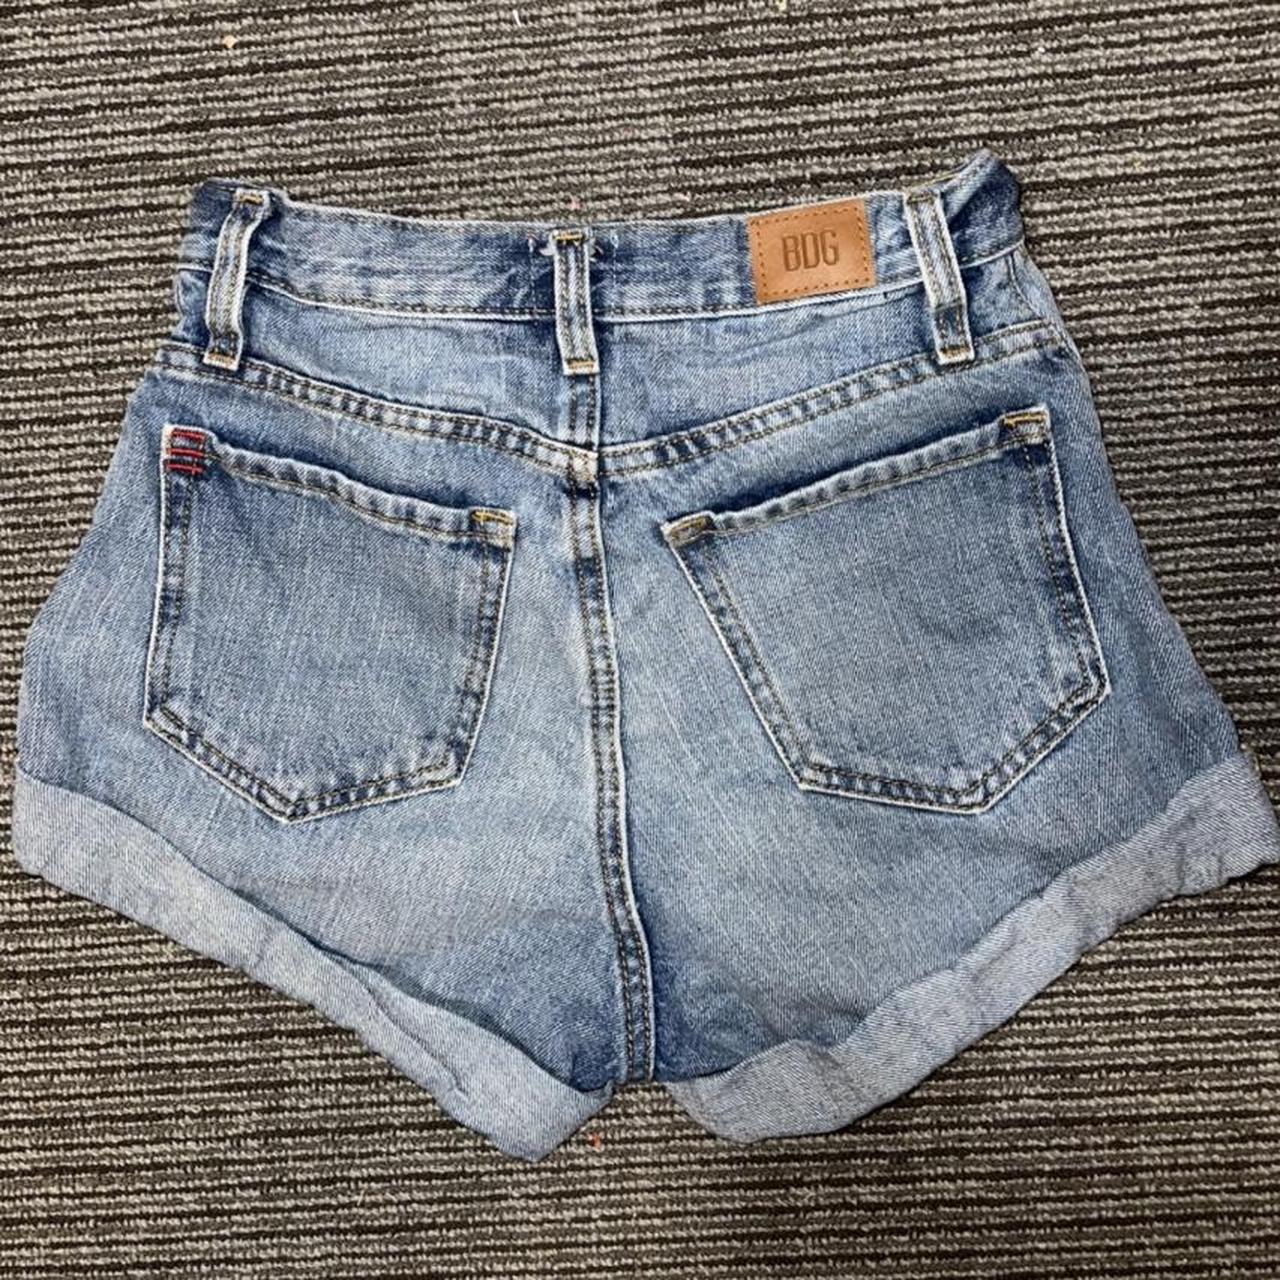 BDG High Rise Denim Shorts - Urban Outfitters - Size... - Depop